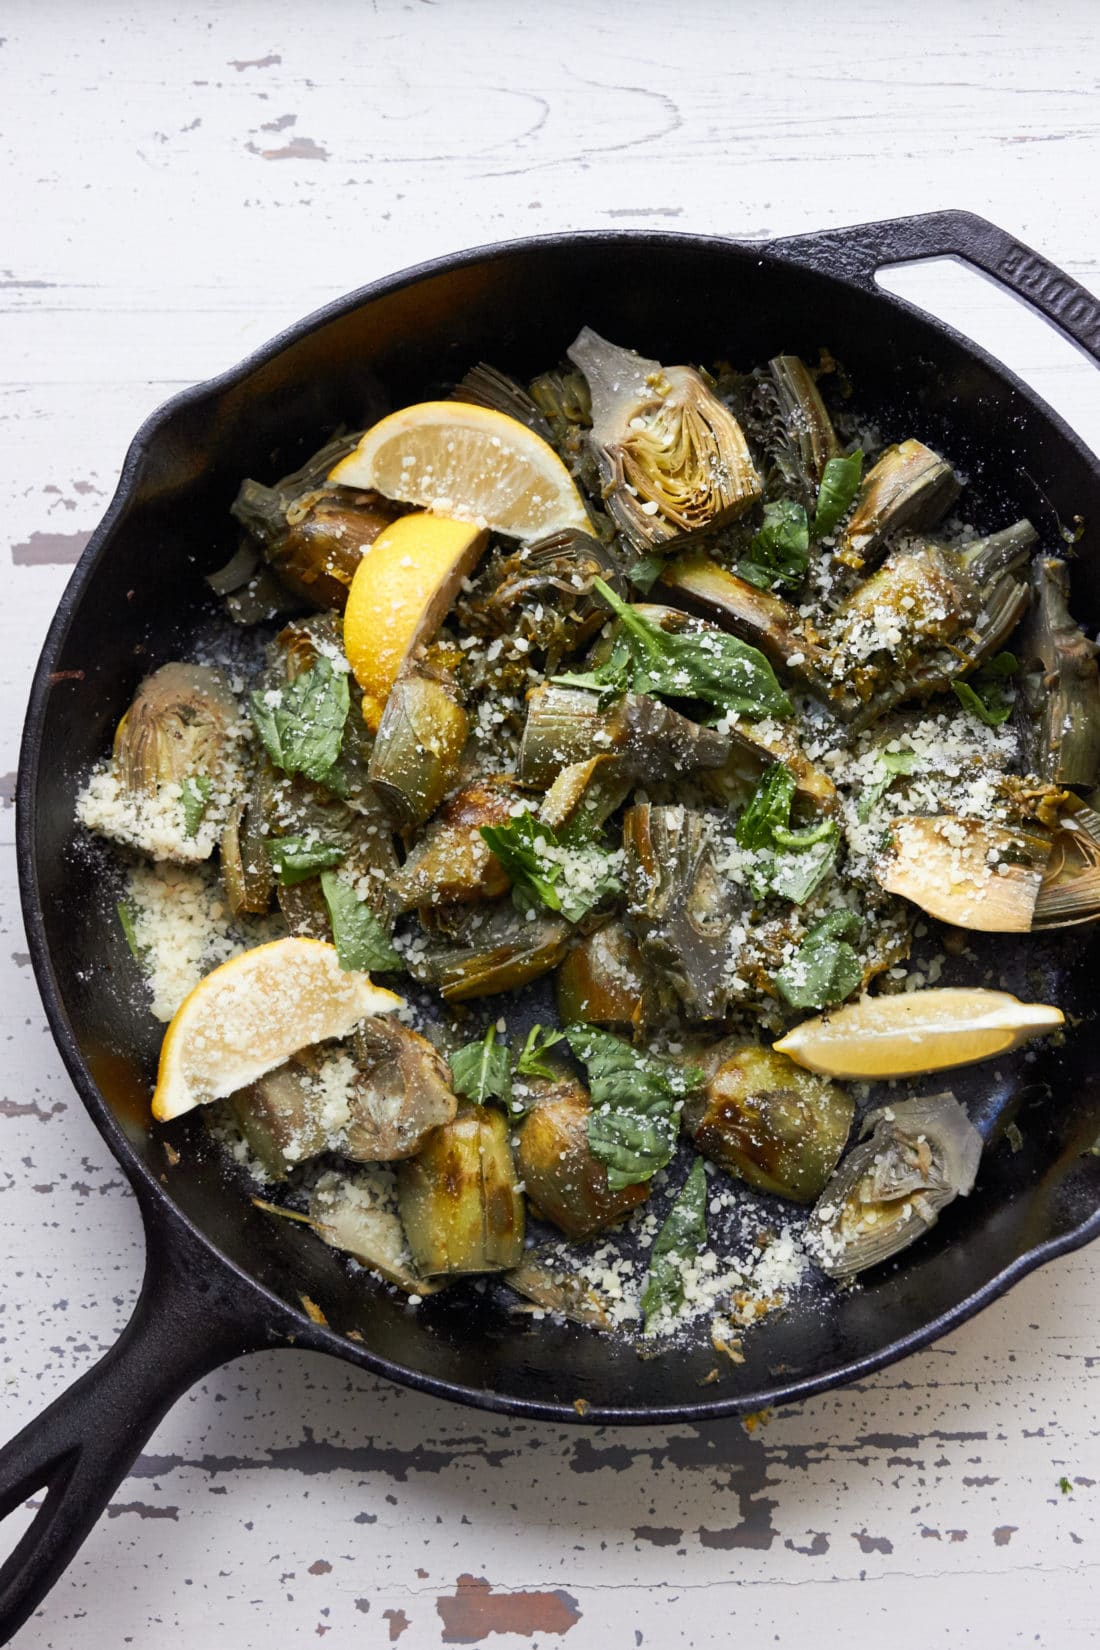 Braised Baby Artichokes with Leeks and Capers in a skillet.